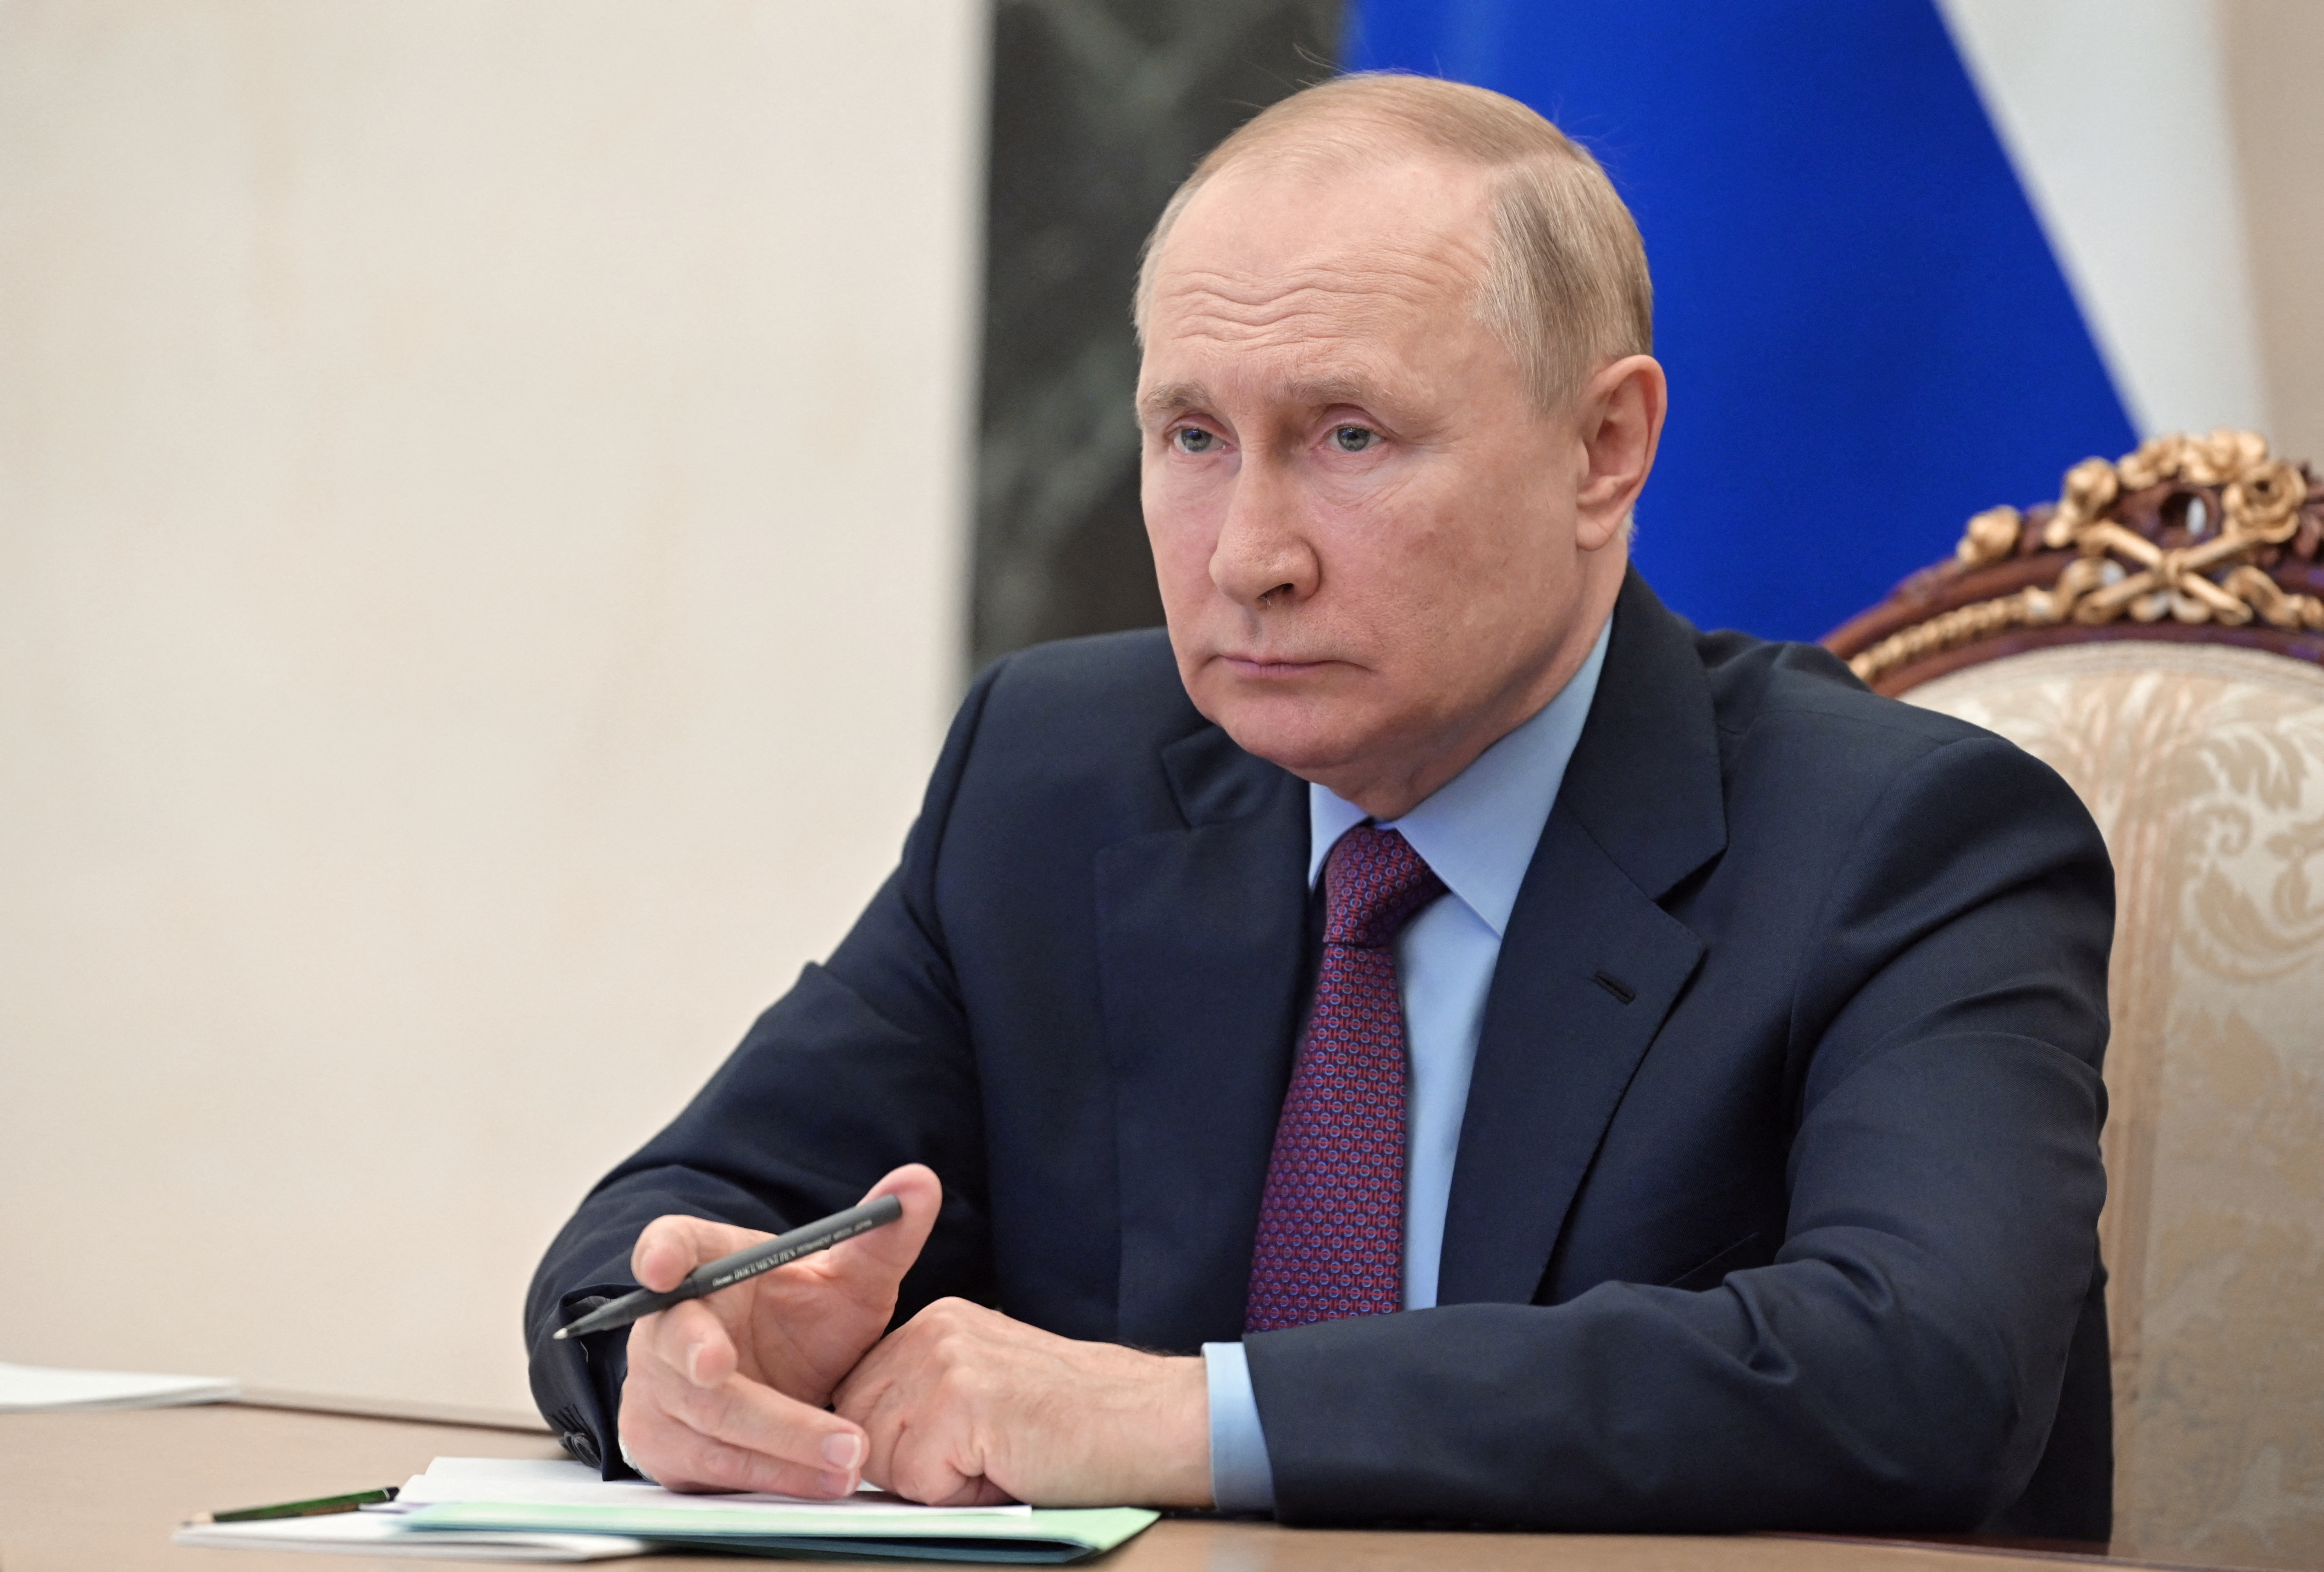 Russian President Vladimir Putin chairs a meeting on the development of the country's metallurgical sector, via a video link in Moscow